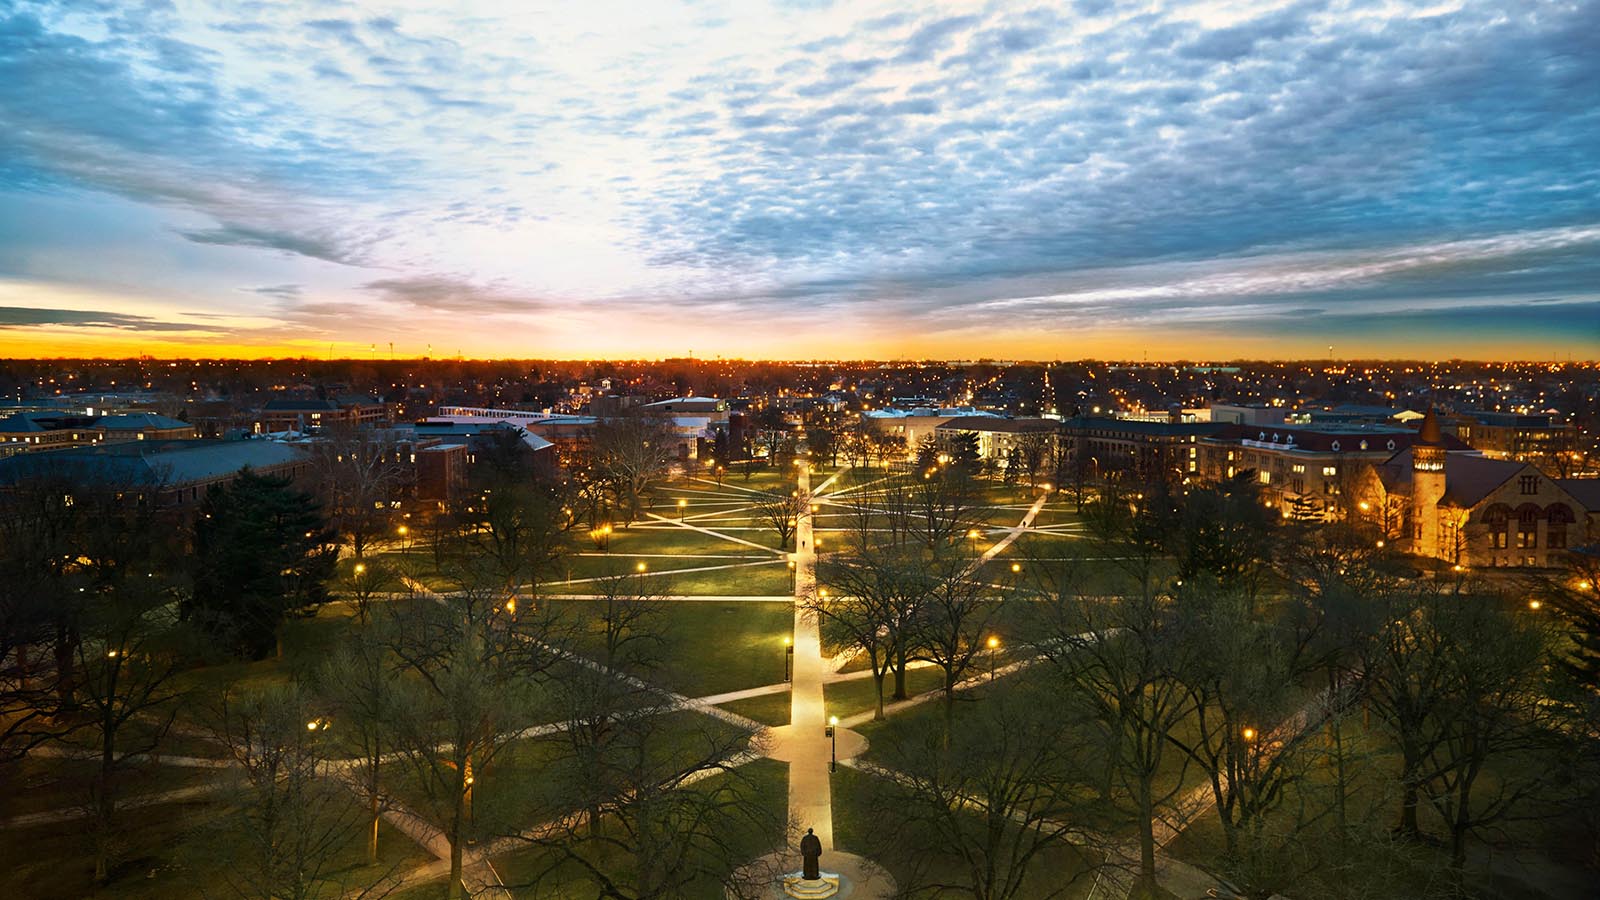 Ohio State Oval at dawn